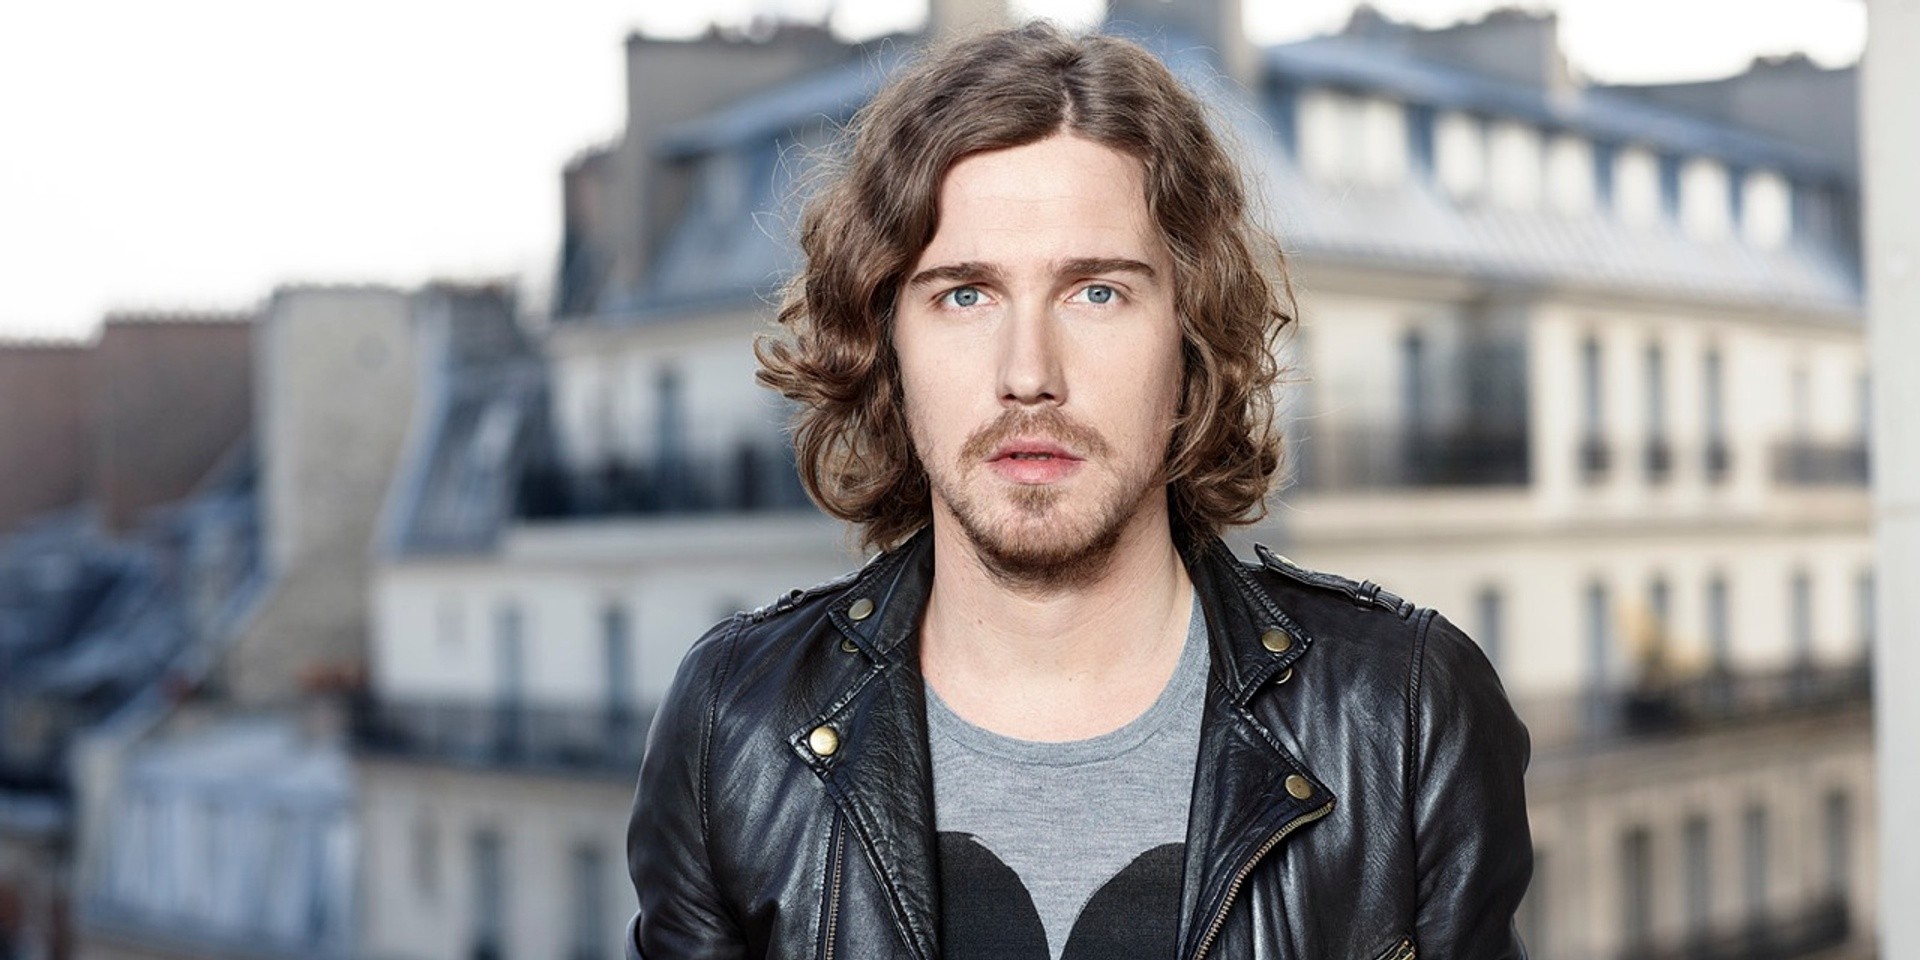 French singer-songwriter Julien Doré to perform in Singapore